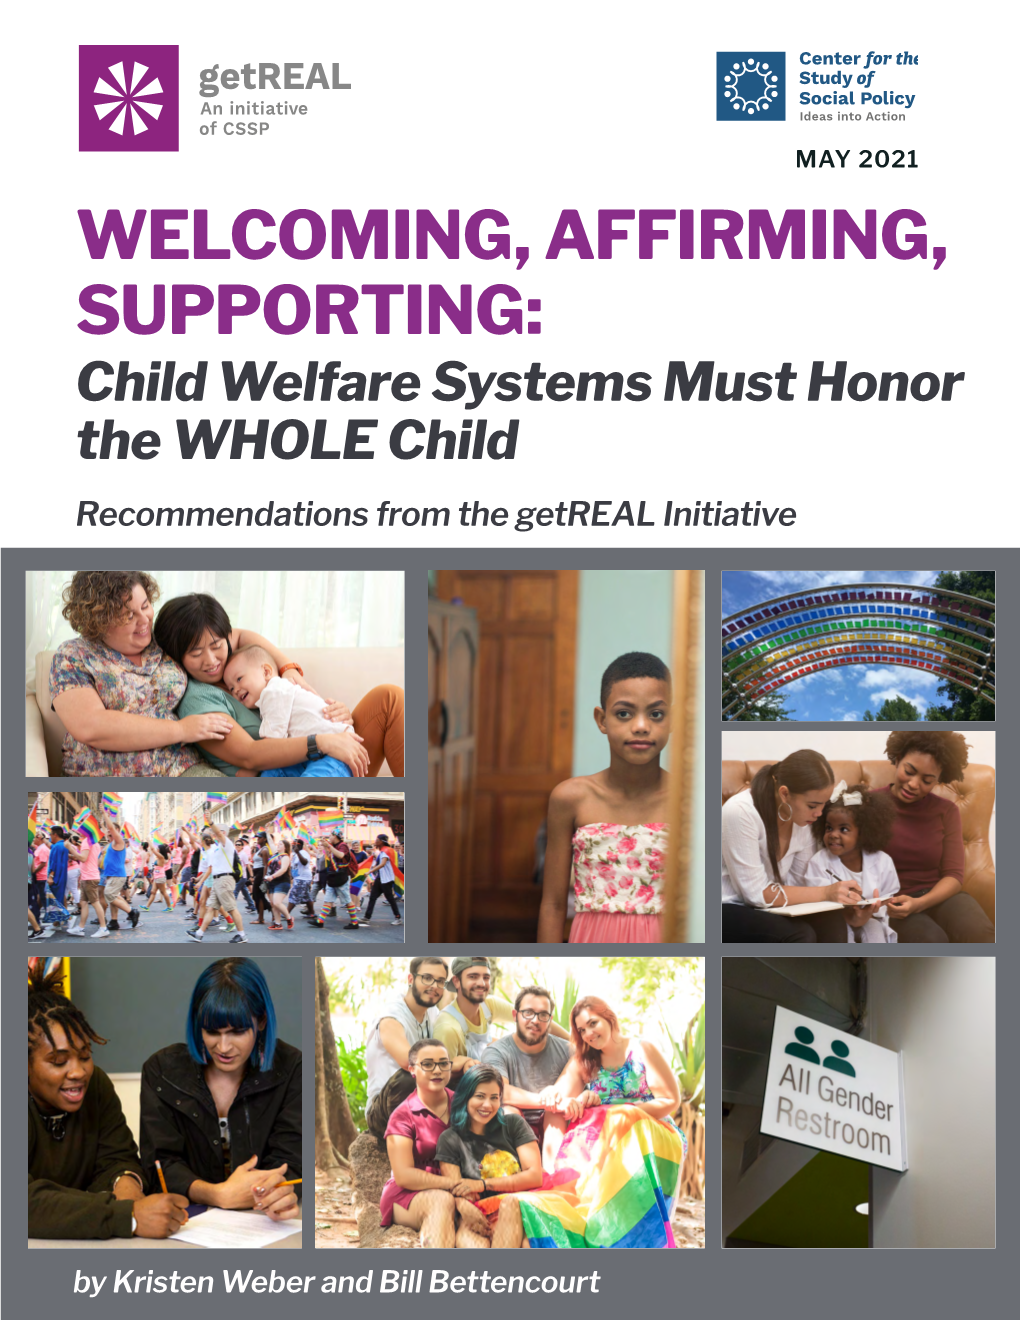 WELCOMING, AFFIRMING, SUPPORTING: Child Welfare Systems Must Honor the WHOLE Child Recommendations from the Getreal Initiative